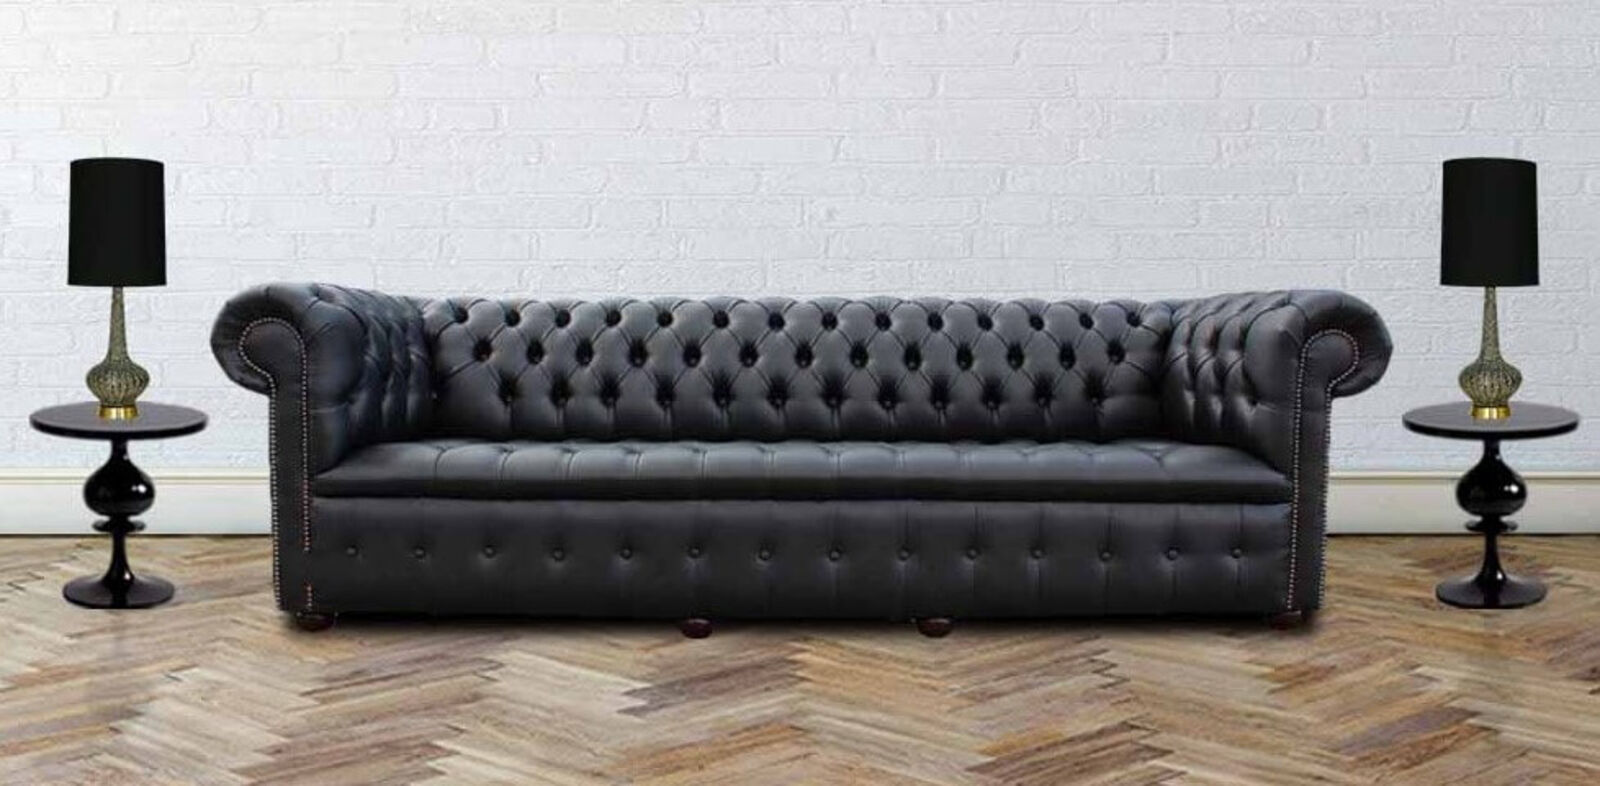 Product photograph of Chesterfield 4 Seater Settee Buttoned Seat Old English Black Leather Sofa Offer from Designer Sofas 4U